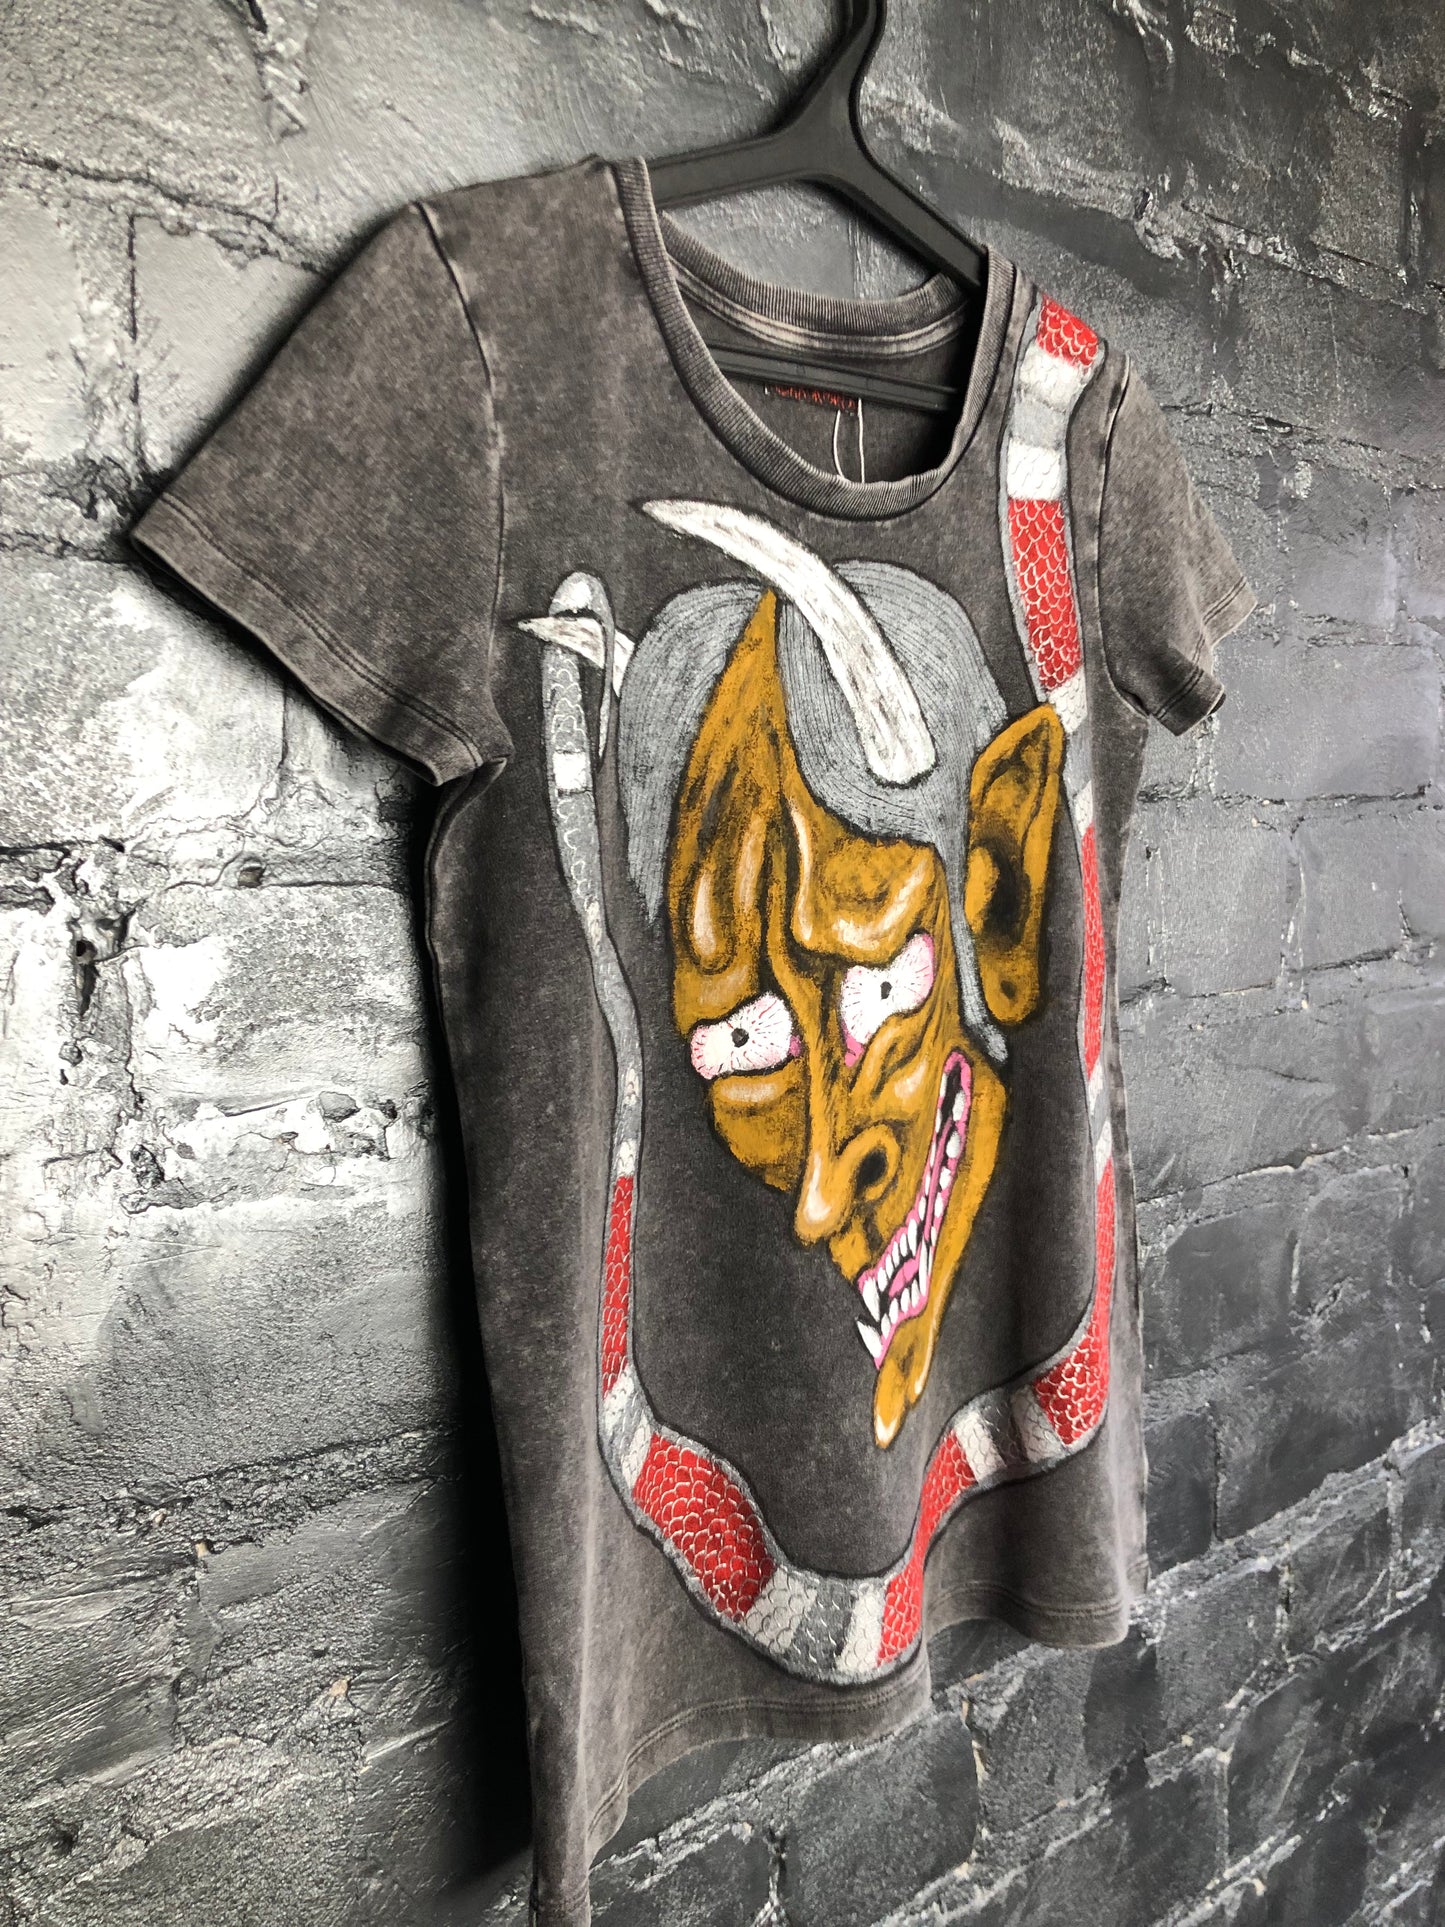 View on the side of Women's Hannya Demon Fancy Tattoo T -shirt with A Snake